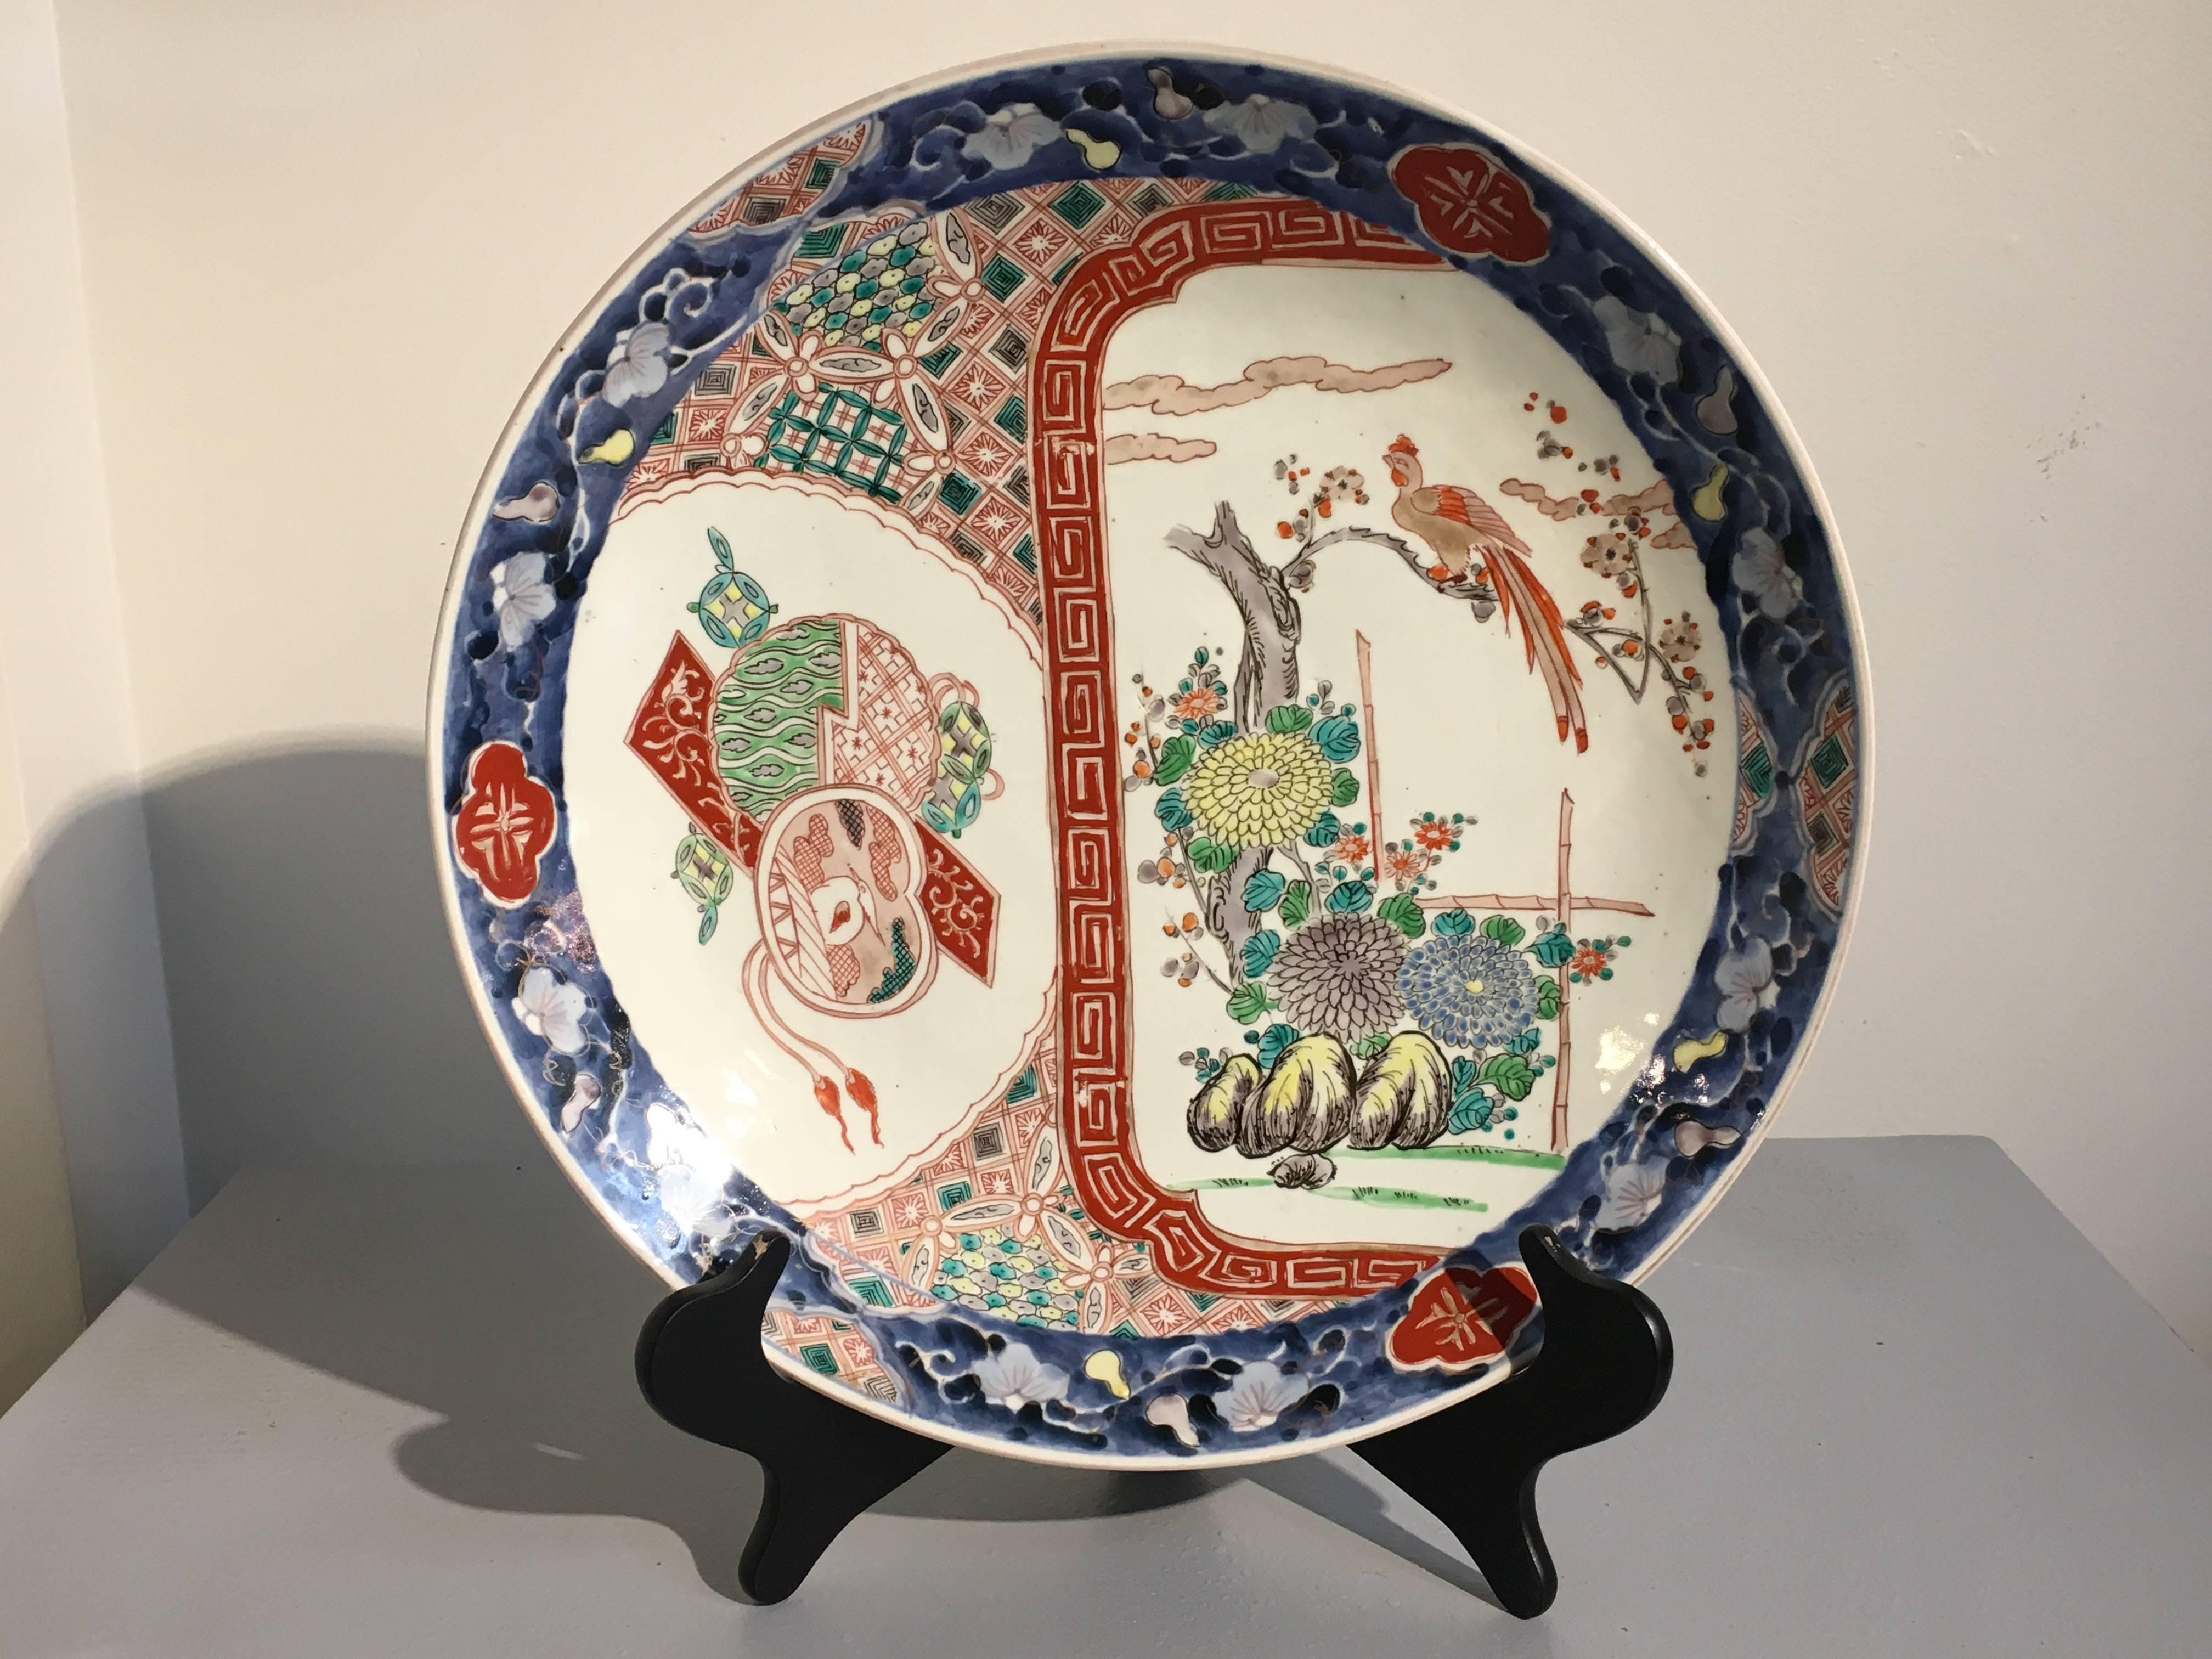 A nicely decorated Japanese Meiji Period Imari charger, late 19th century, Japan. 

The porcelain charger featuring a design of a hoho bird, or phoenix, perched in a garden setting, with rocks and blossoming flowers. The enamels painted in vibrant